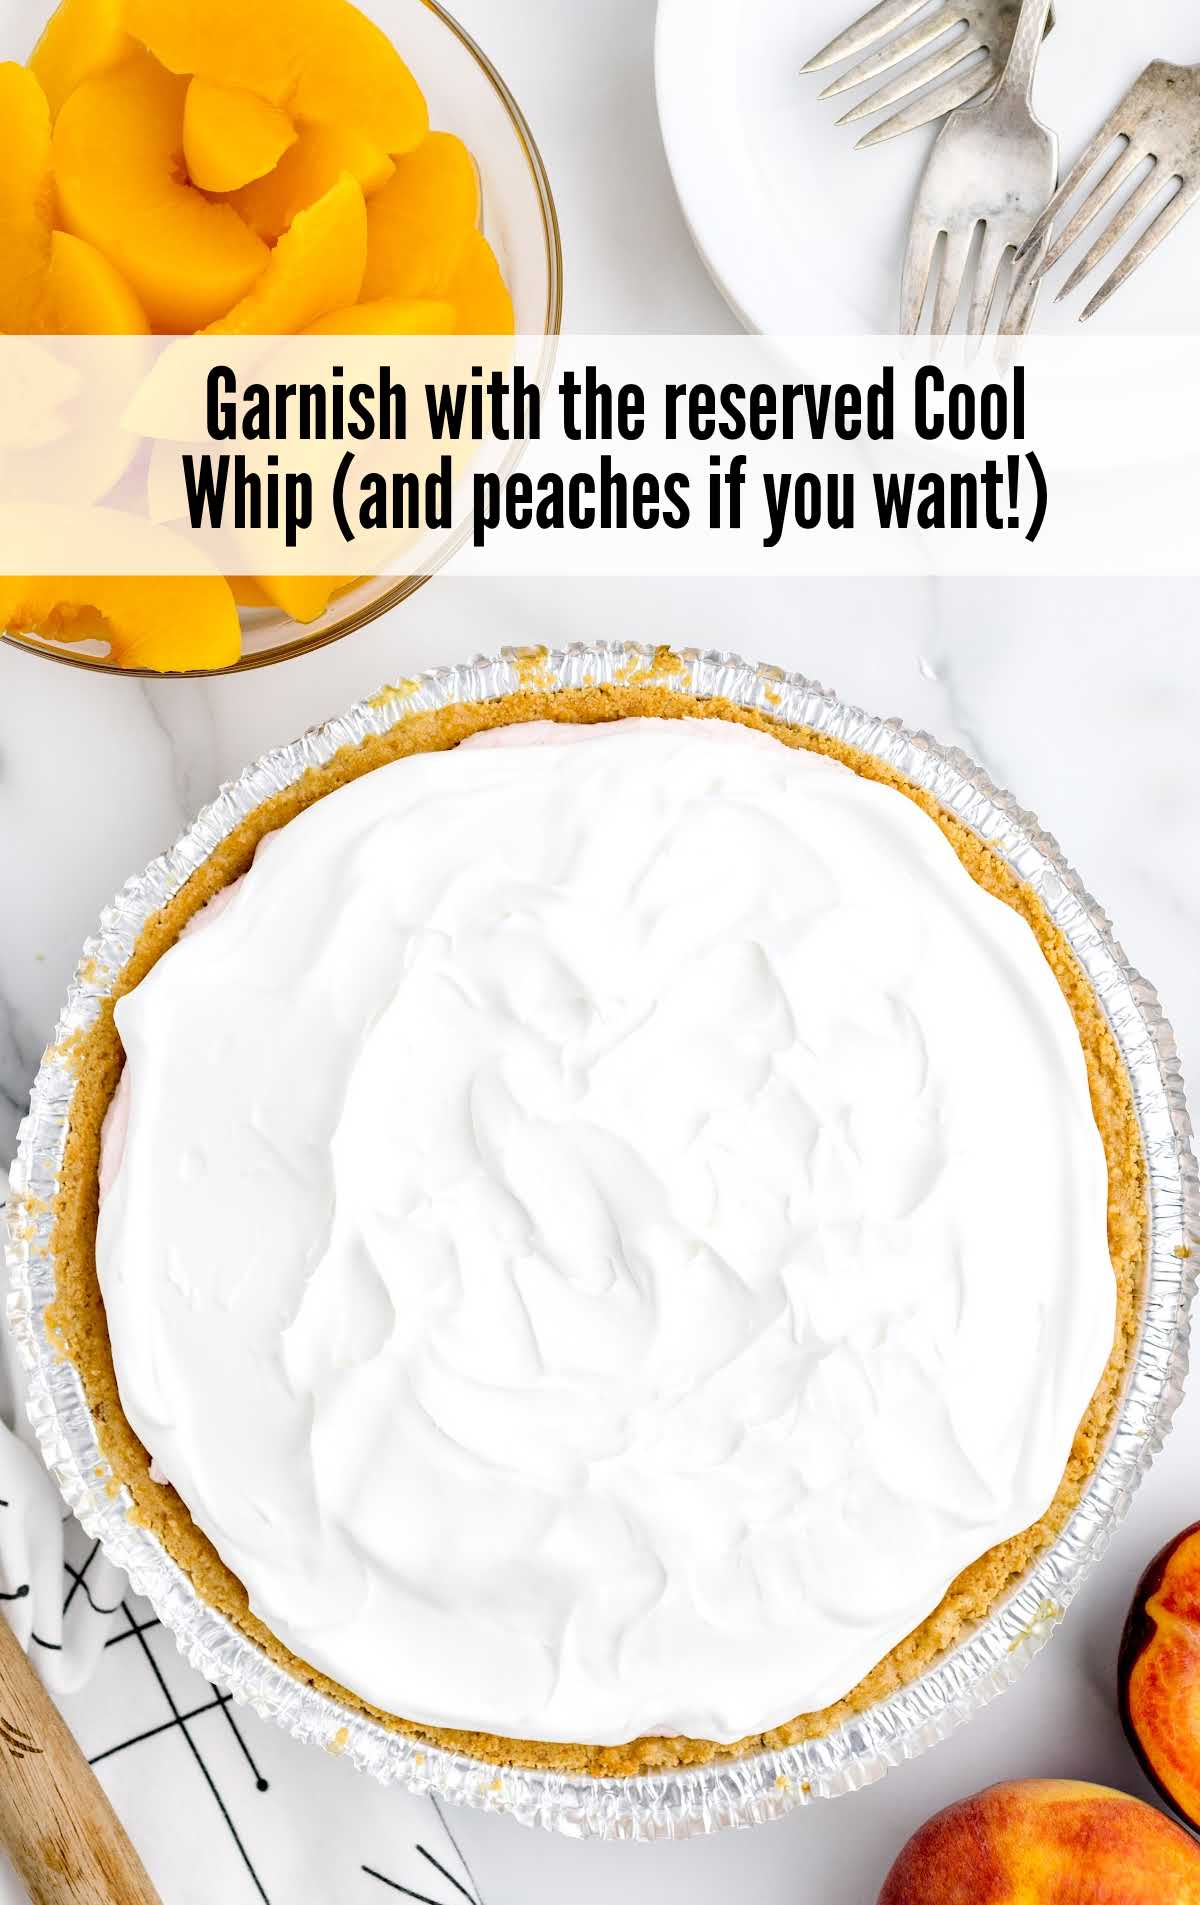 A piece of cake on a plate, with Peach and Cool Whip